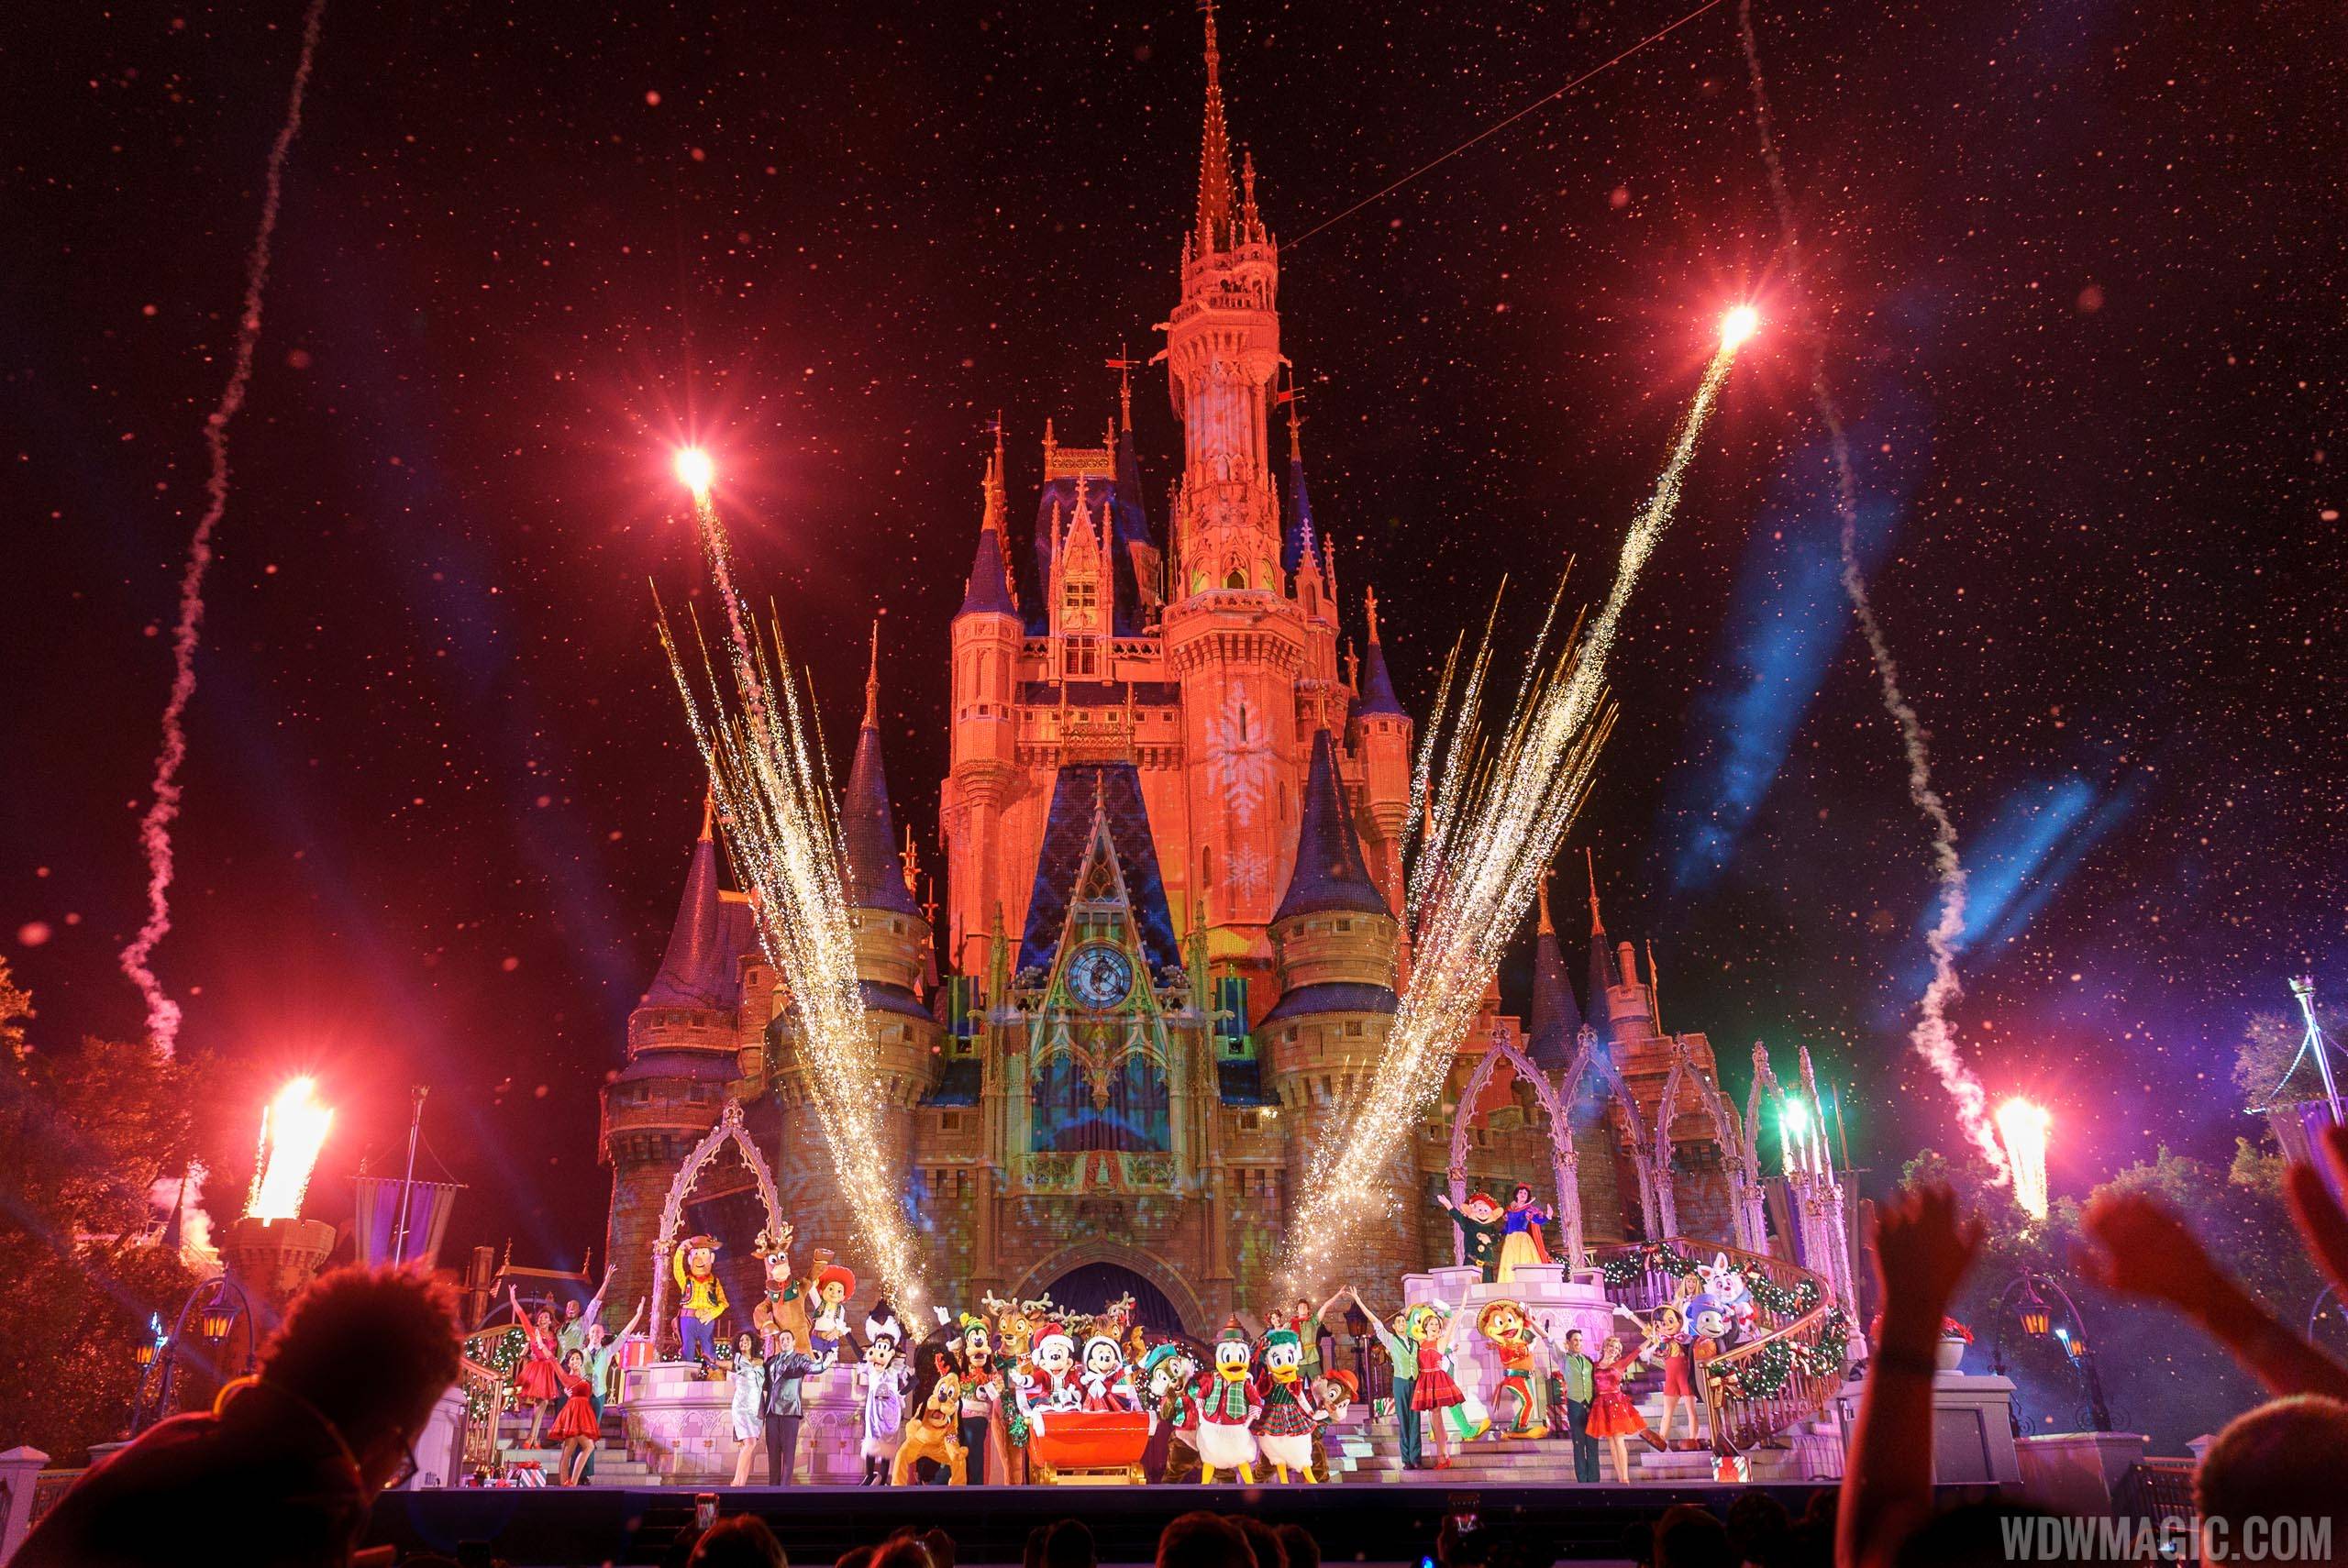 VIDEO - 'Mickey's Most Merriest Celebration' opens at the Magic Kingdom